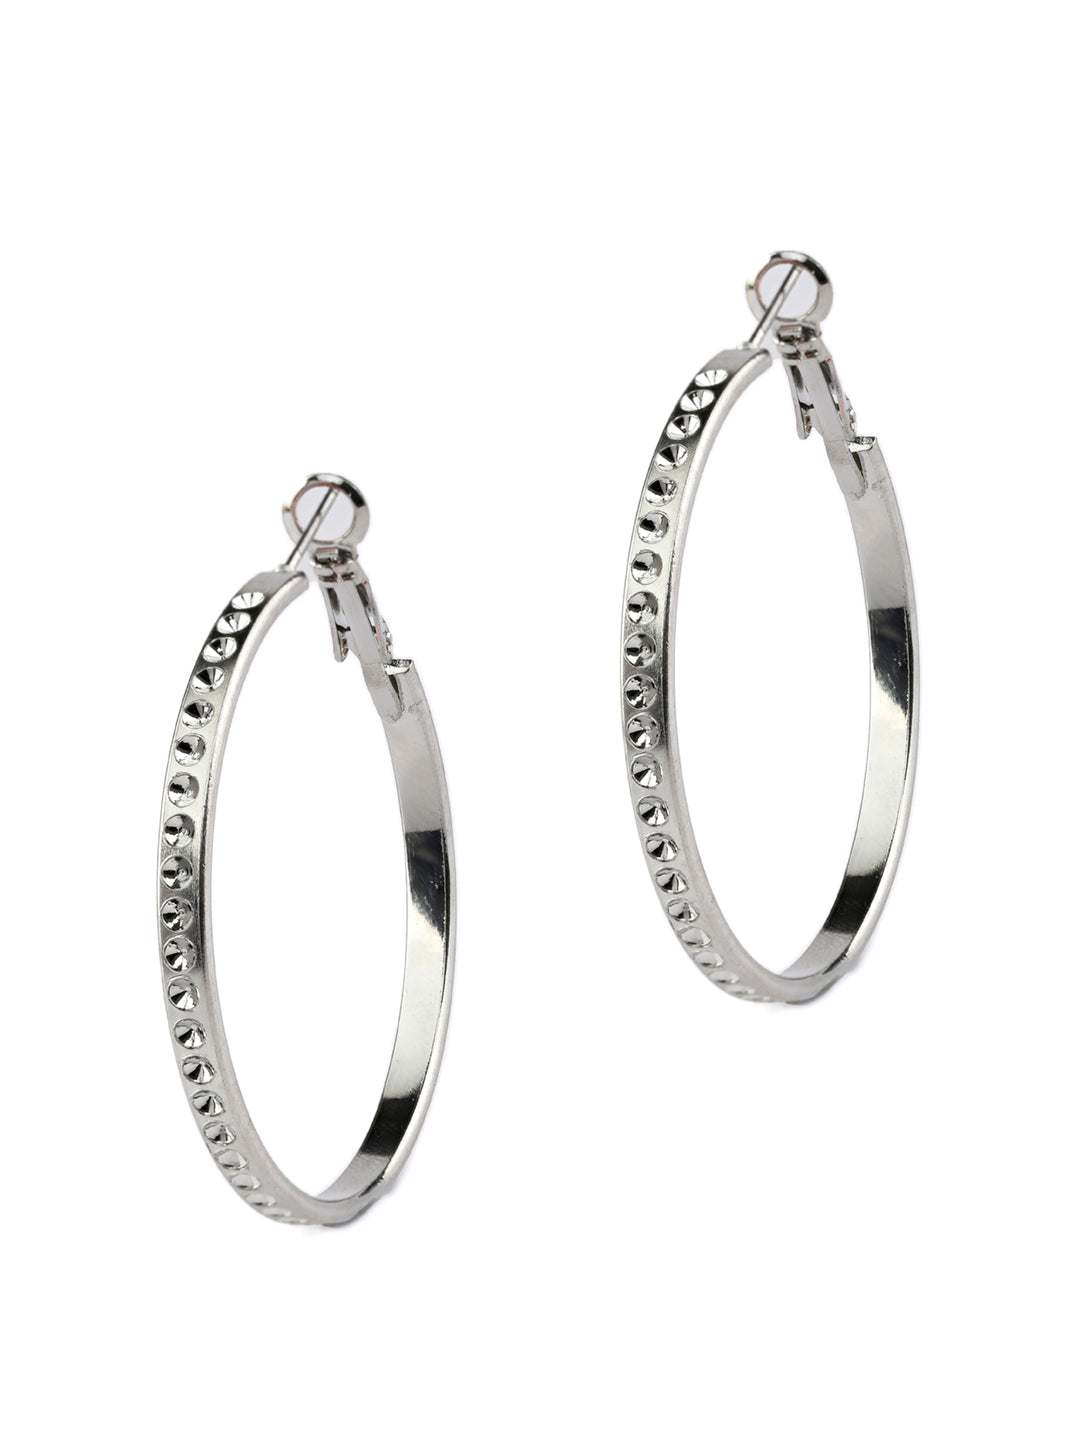 Sterling Silver Hoop Earrings - 925 Gold Plated Pierced Snap Closures -  Wilson Brothers Jewelry